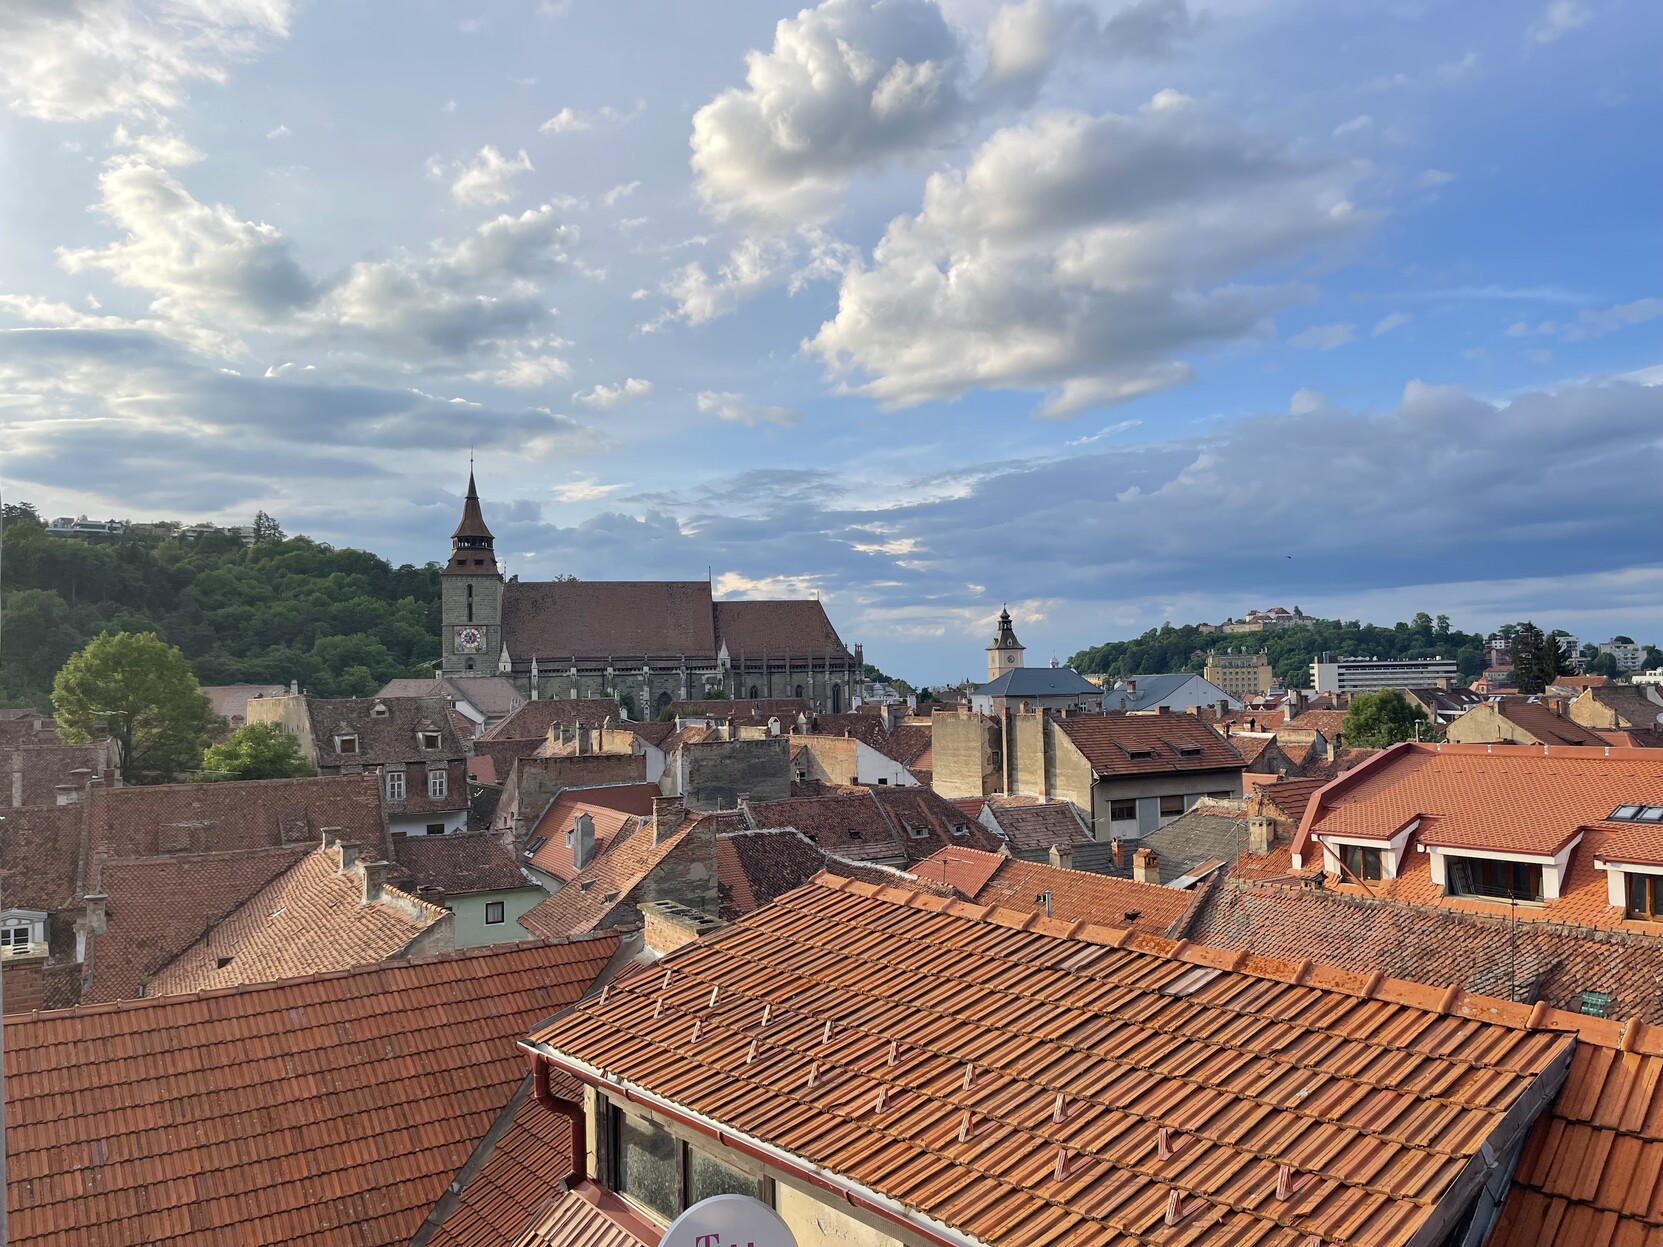 orange tile rooftops of Brașov, plus a view if Biserica Neagra (“the Black Church”) under blue, partly cloudy sky.